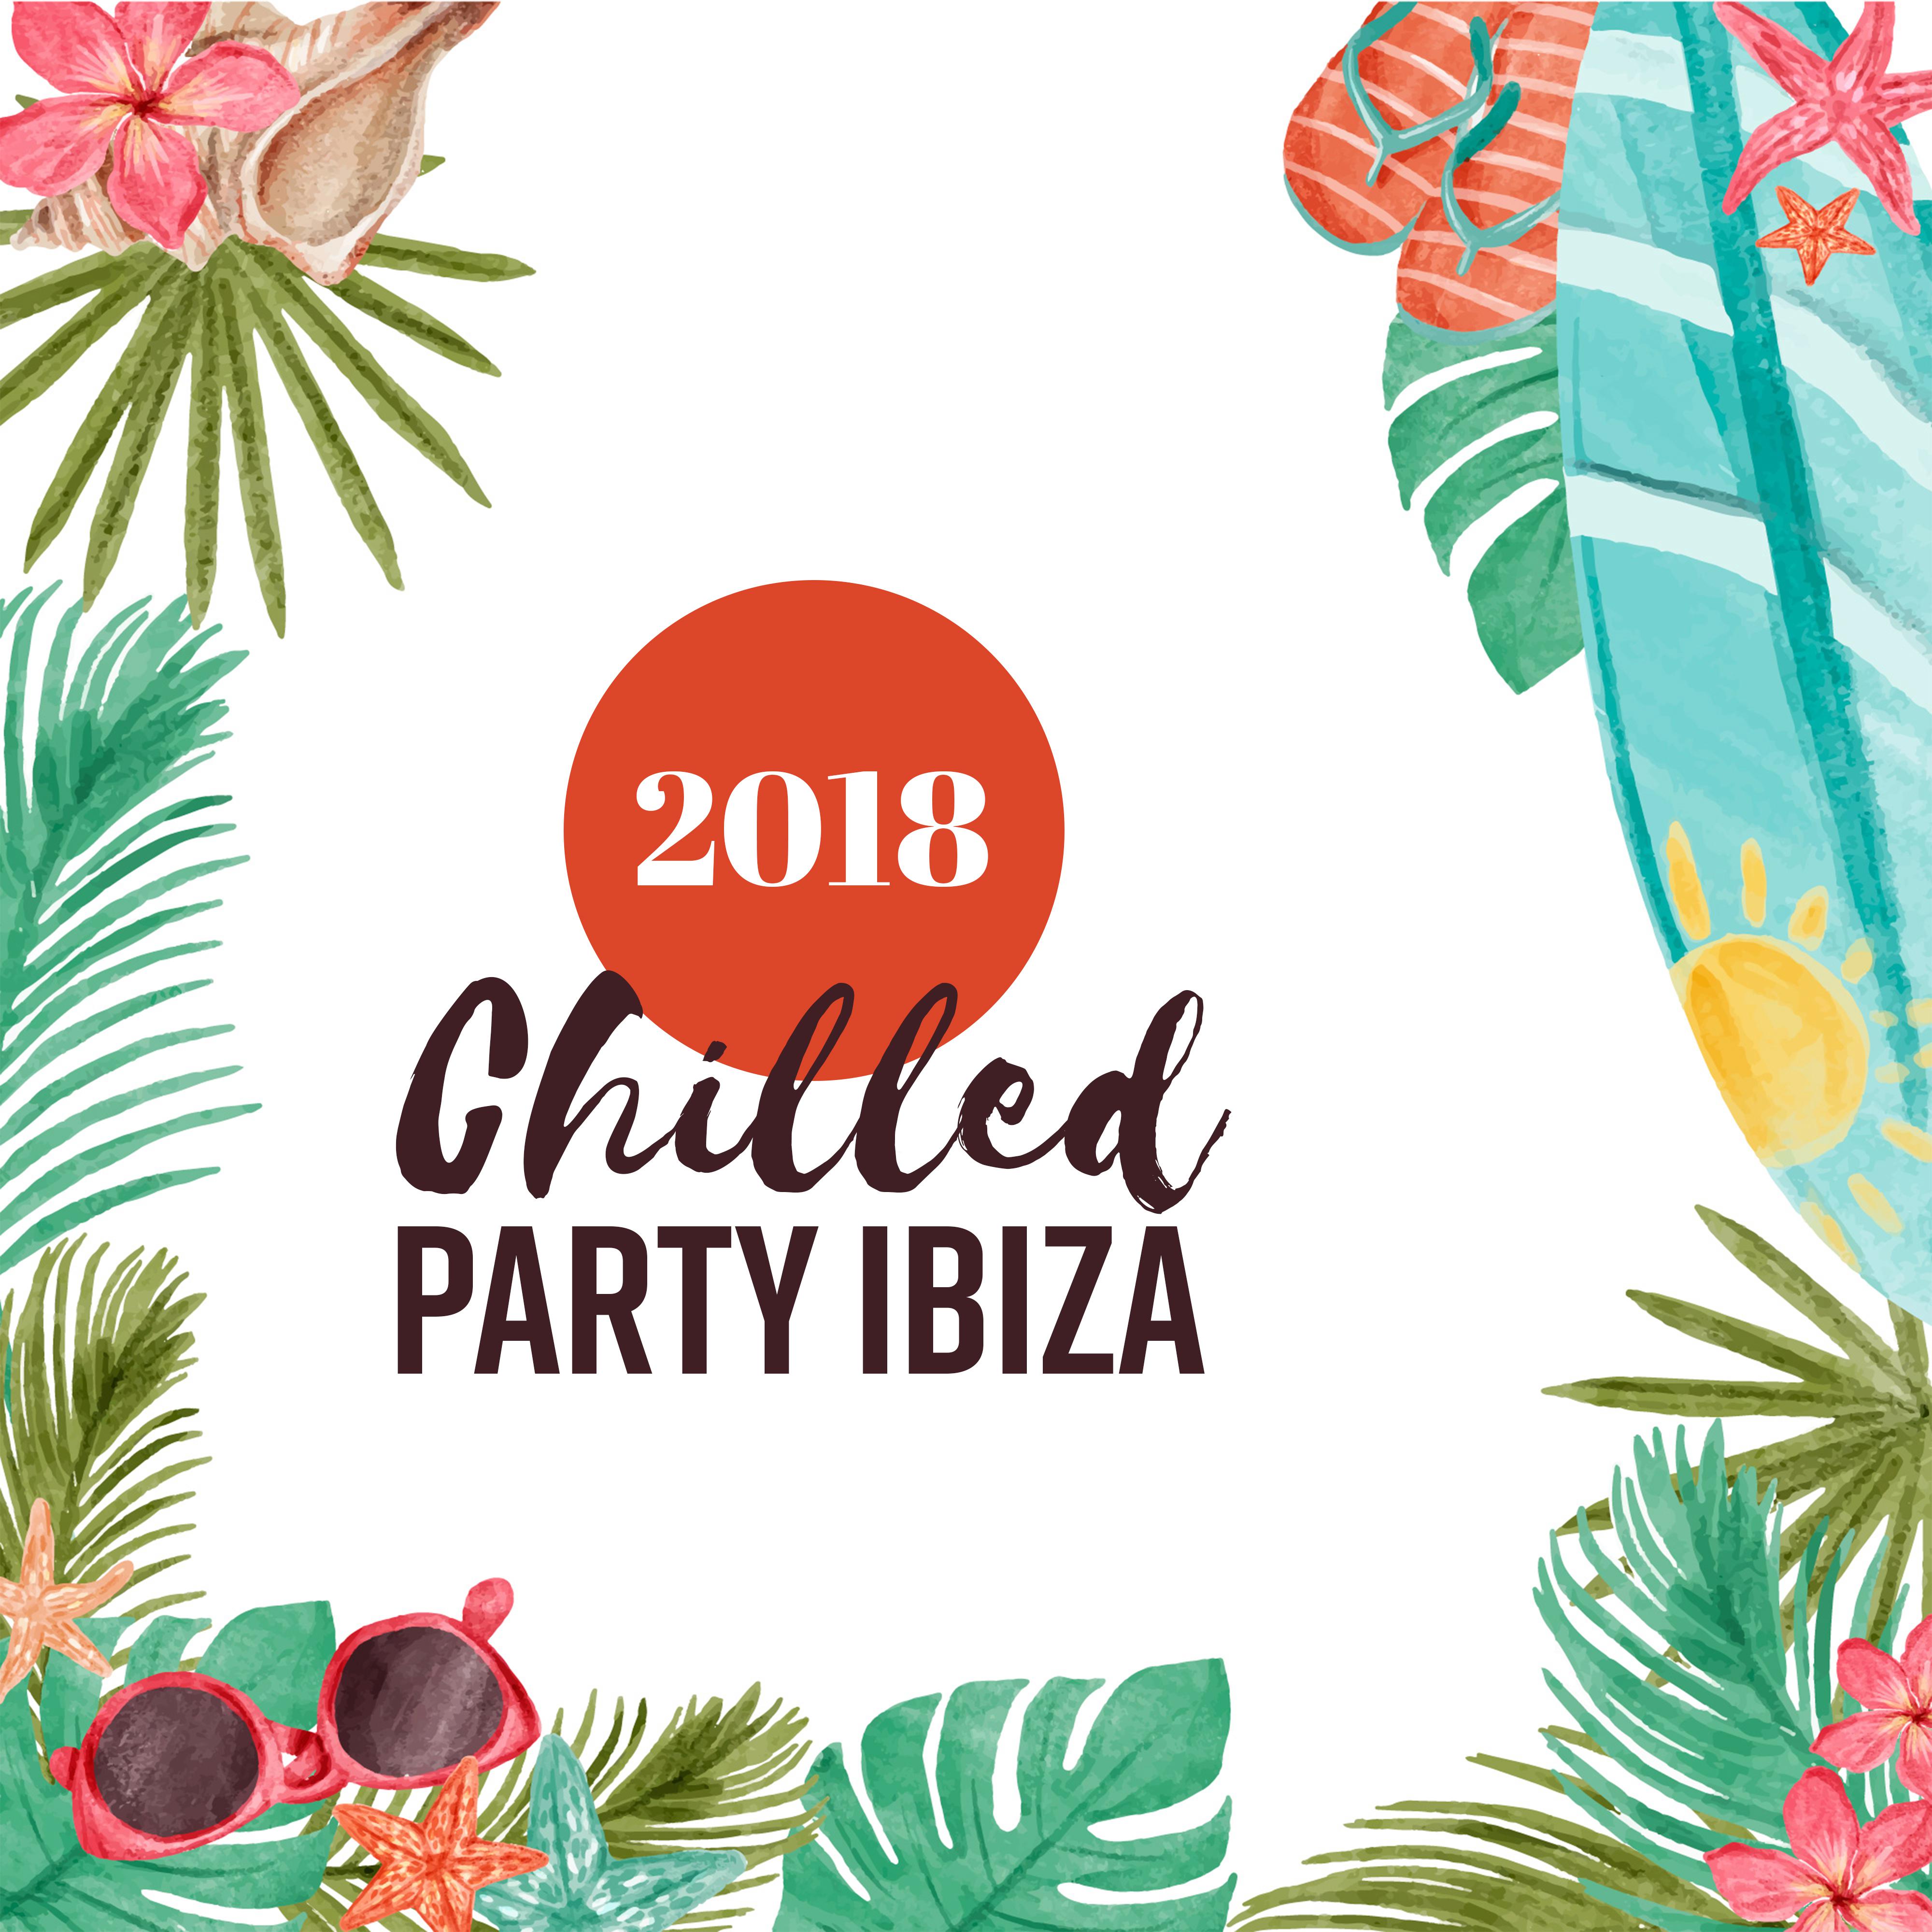 2018 Chilled Party Ibiza